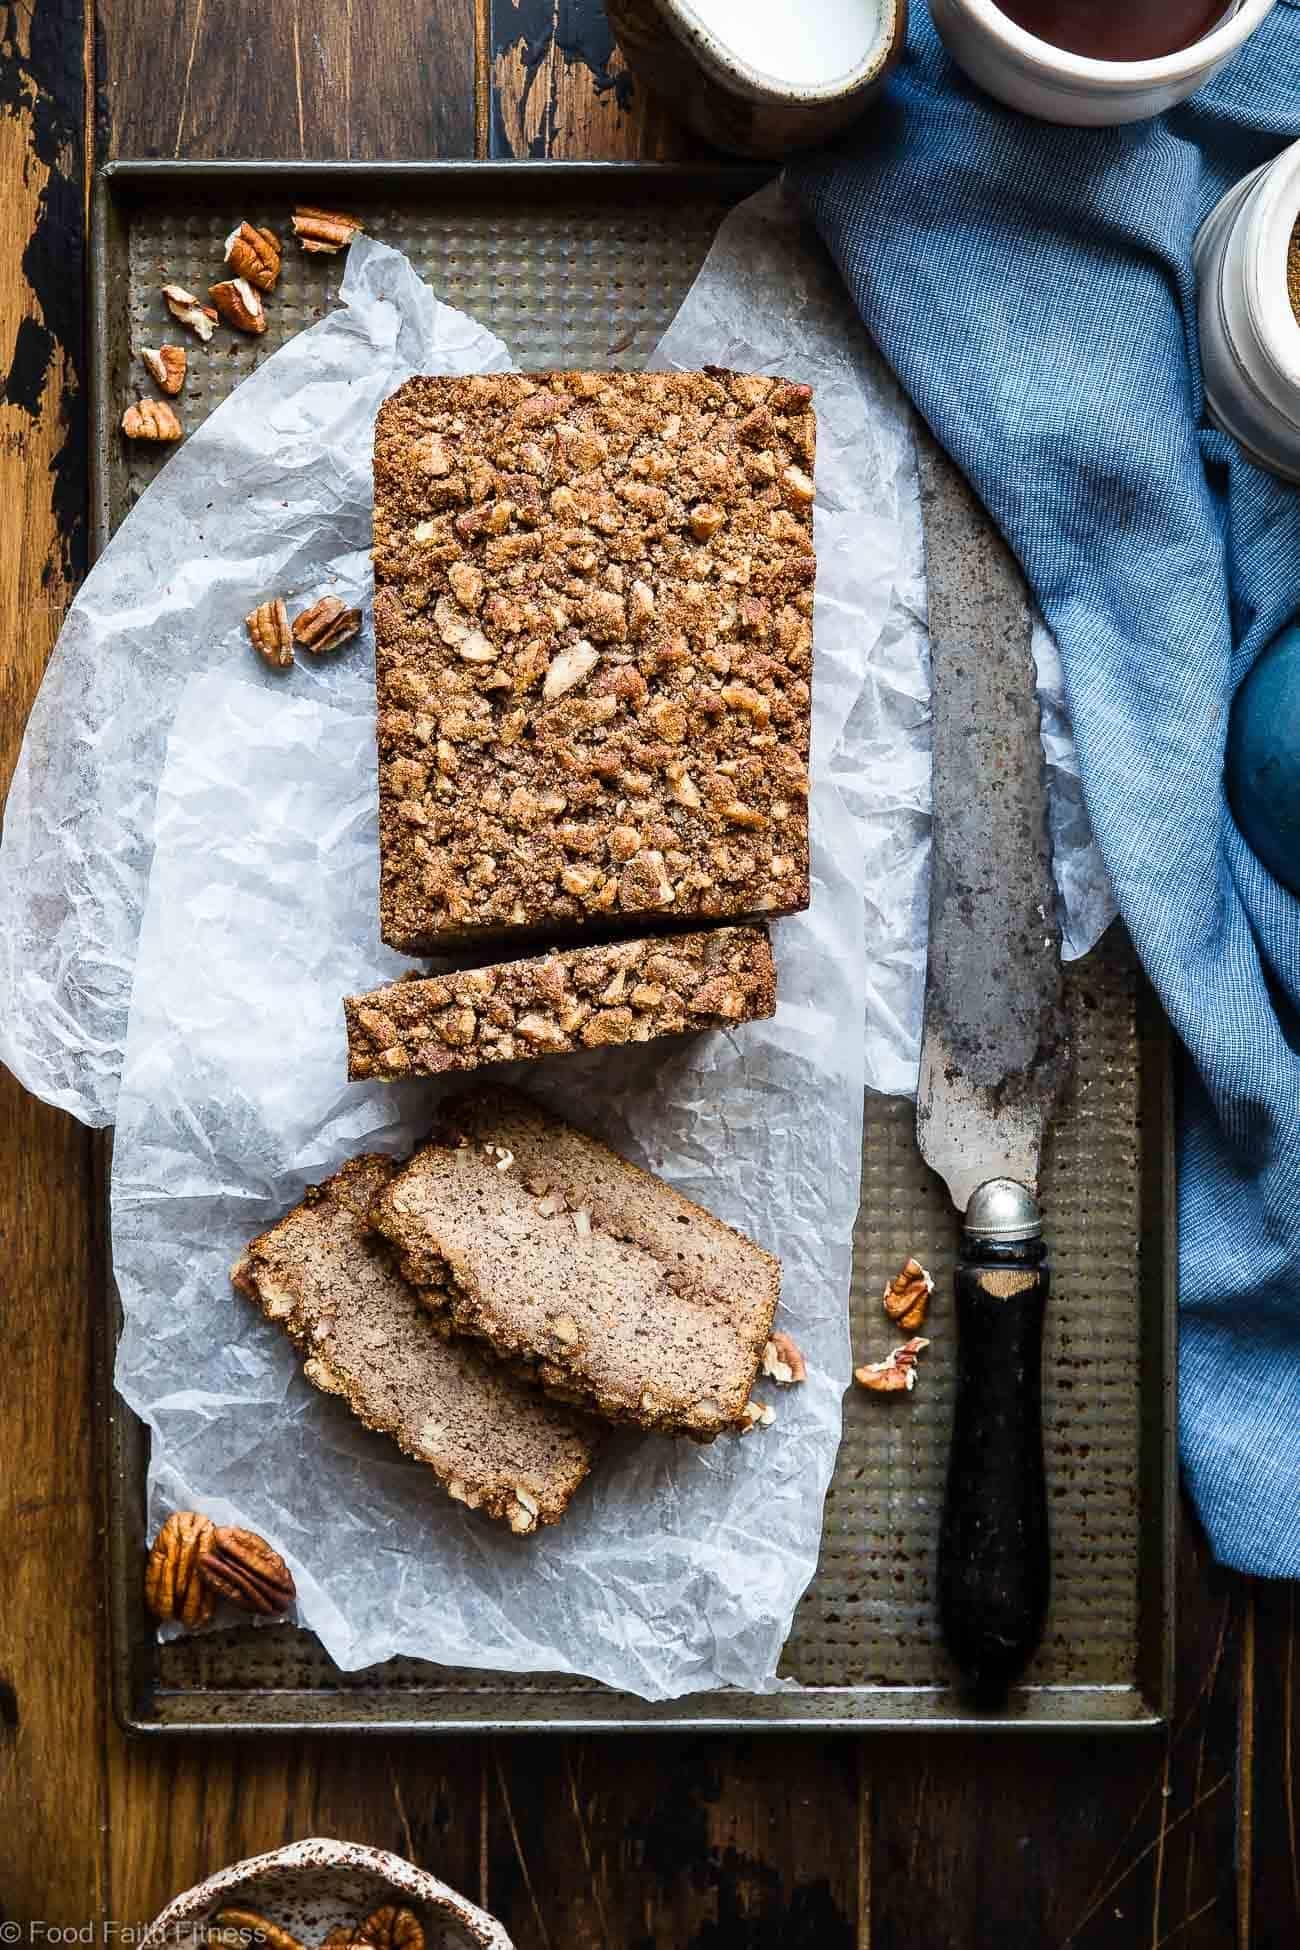 The Best Paleo Banana Bread with Pecan Streusel - This easy Paleo Coconut Flour Bread recipe is gluten/grain/dairy/refined sugar free but perfectly moist and sweet! The pecan topping MAKES it so addicting and you'll never know it's healthy! | Foodfaithfitness.com | @FoodFaithFit